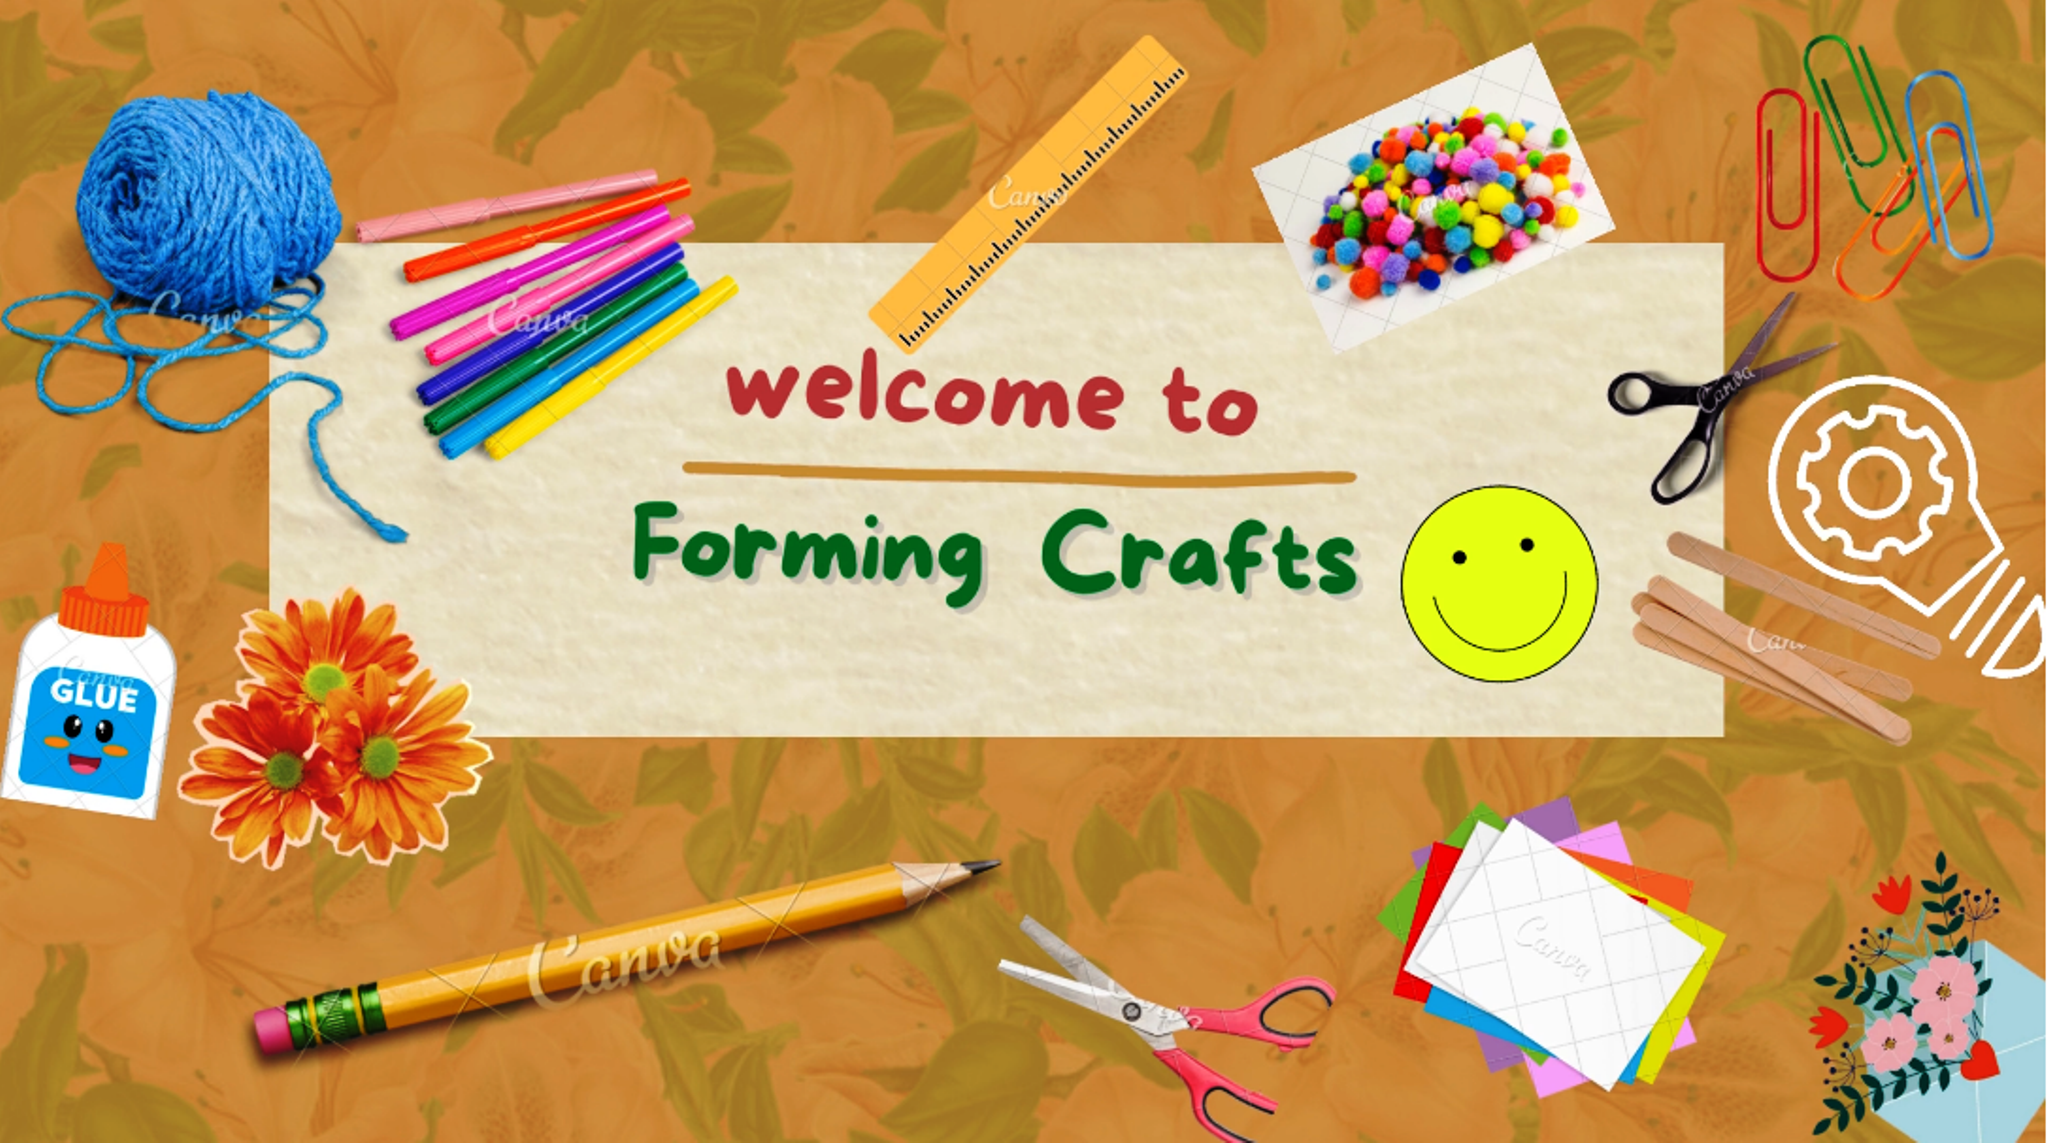 Forming Crafts and Arts